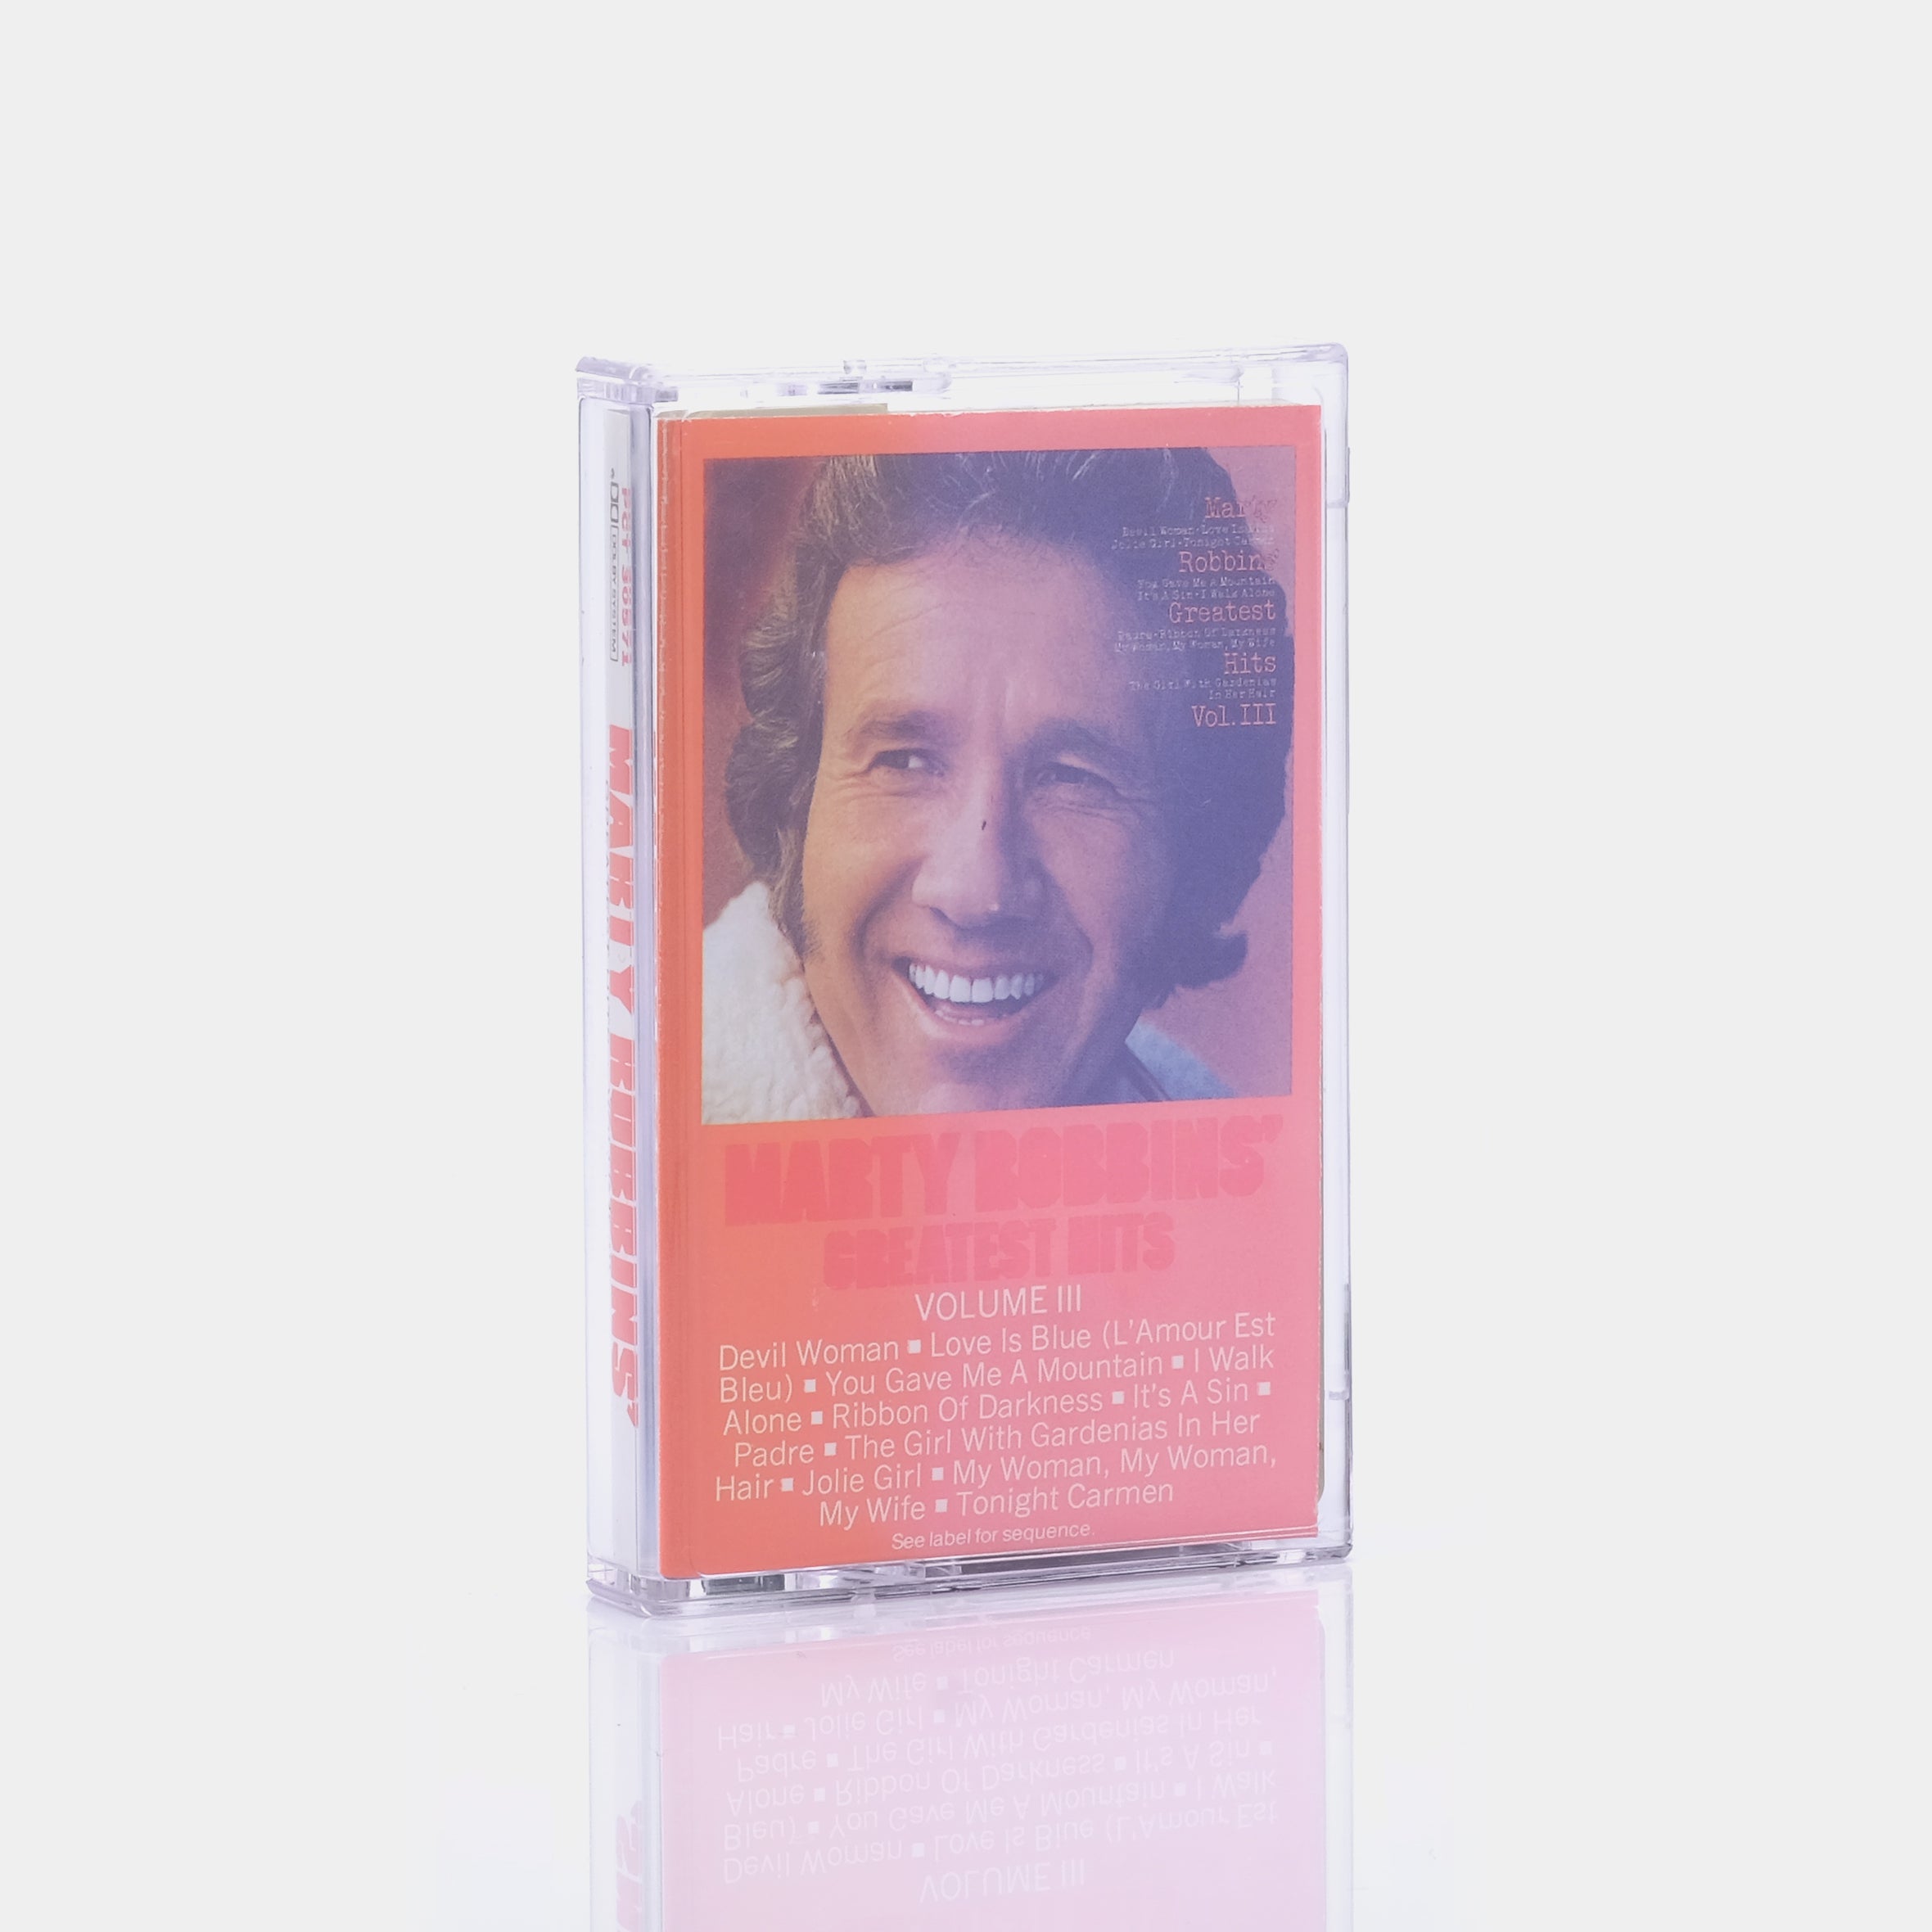 Marty Robbins - Greatest Hits Vol. III Cassette Tape